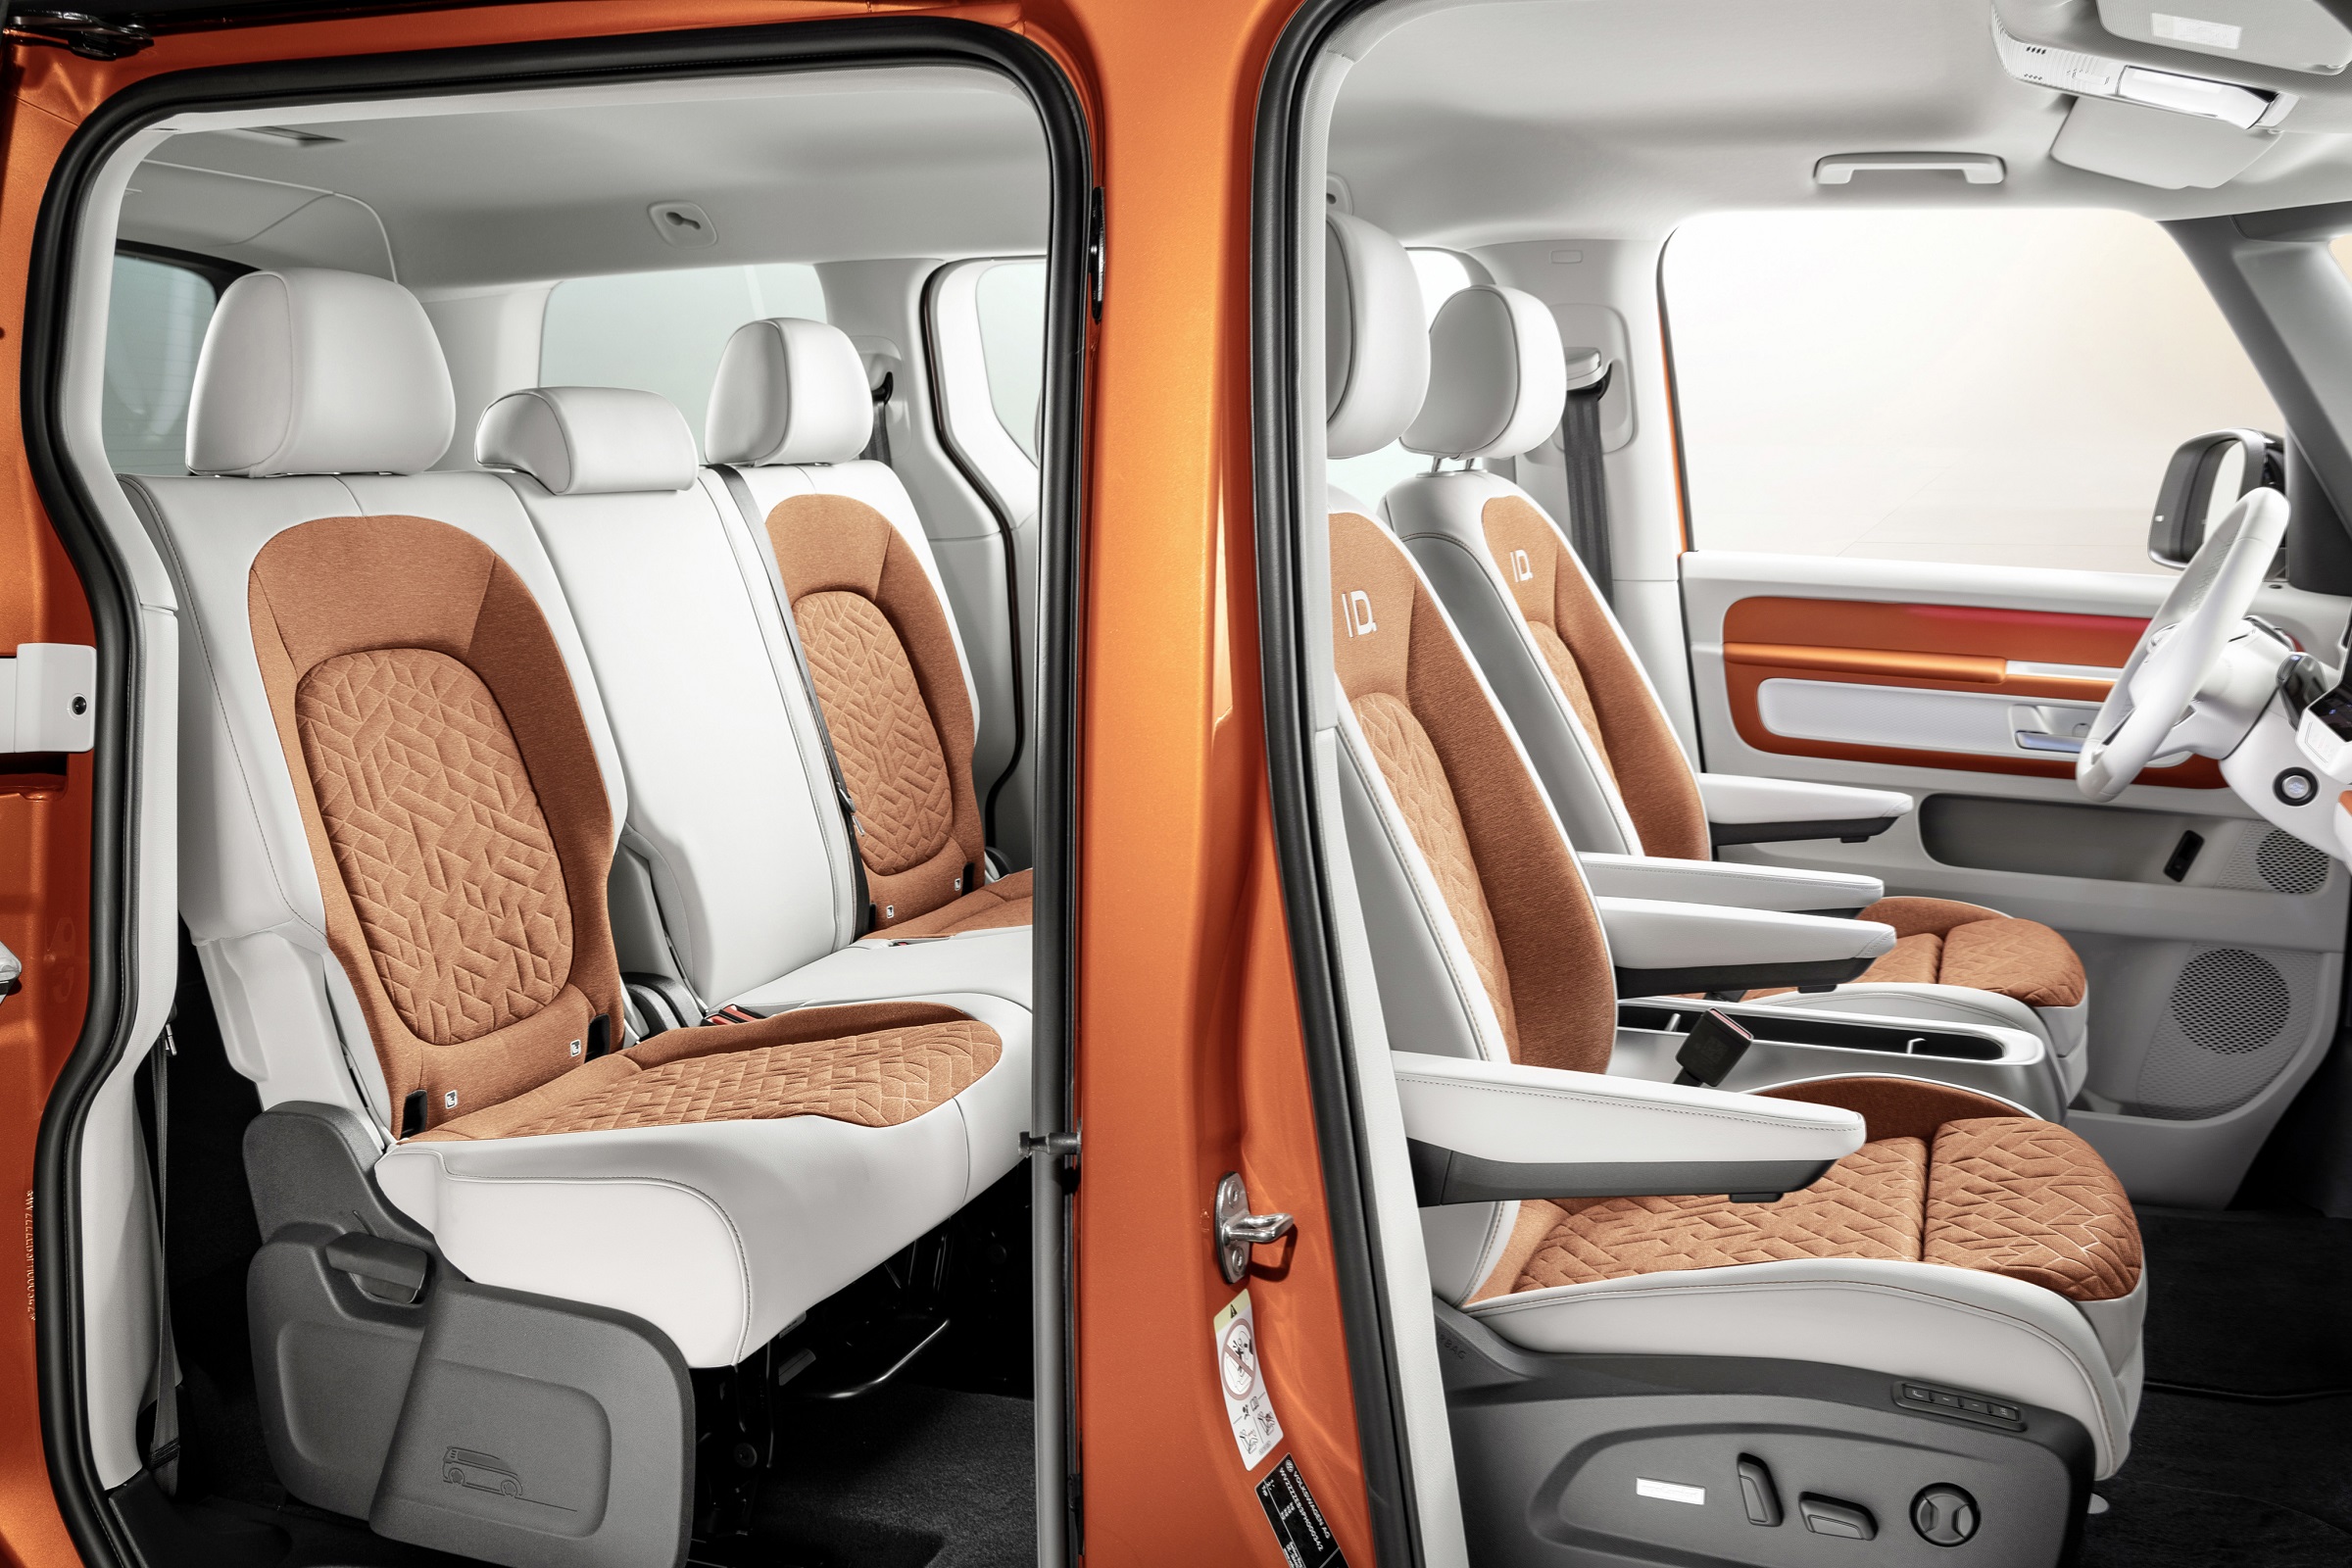 Official interior pictures of Volkswagen electric mini bus